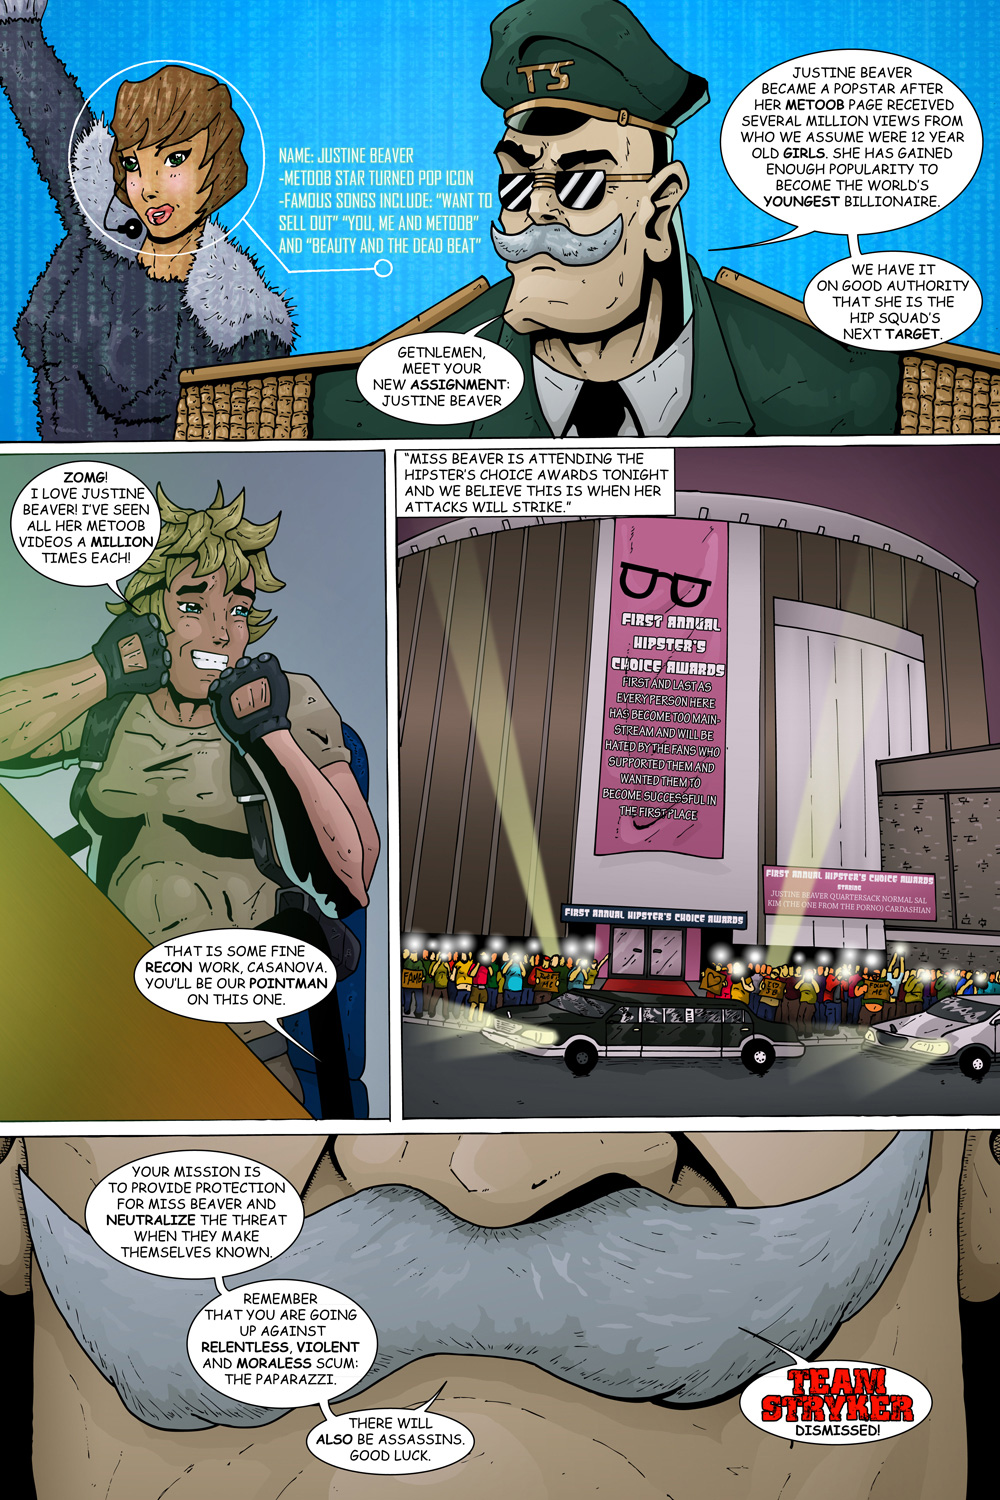 MISSION 004: PAGE 03 “YOUR NEW ASSIGNMENT”